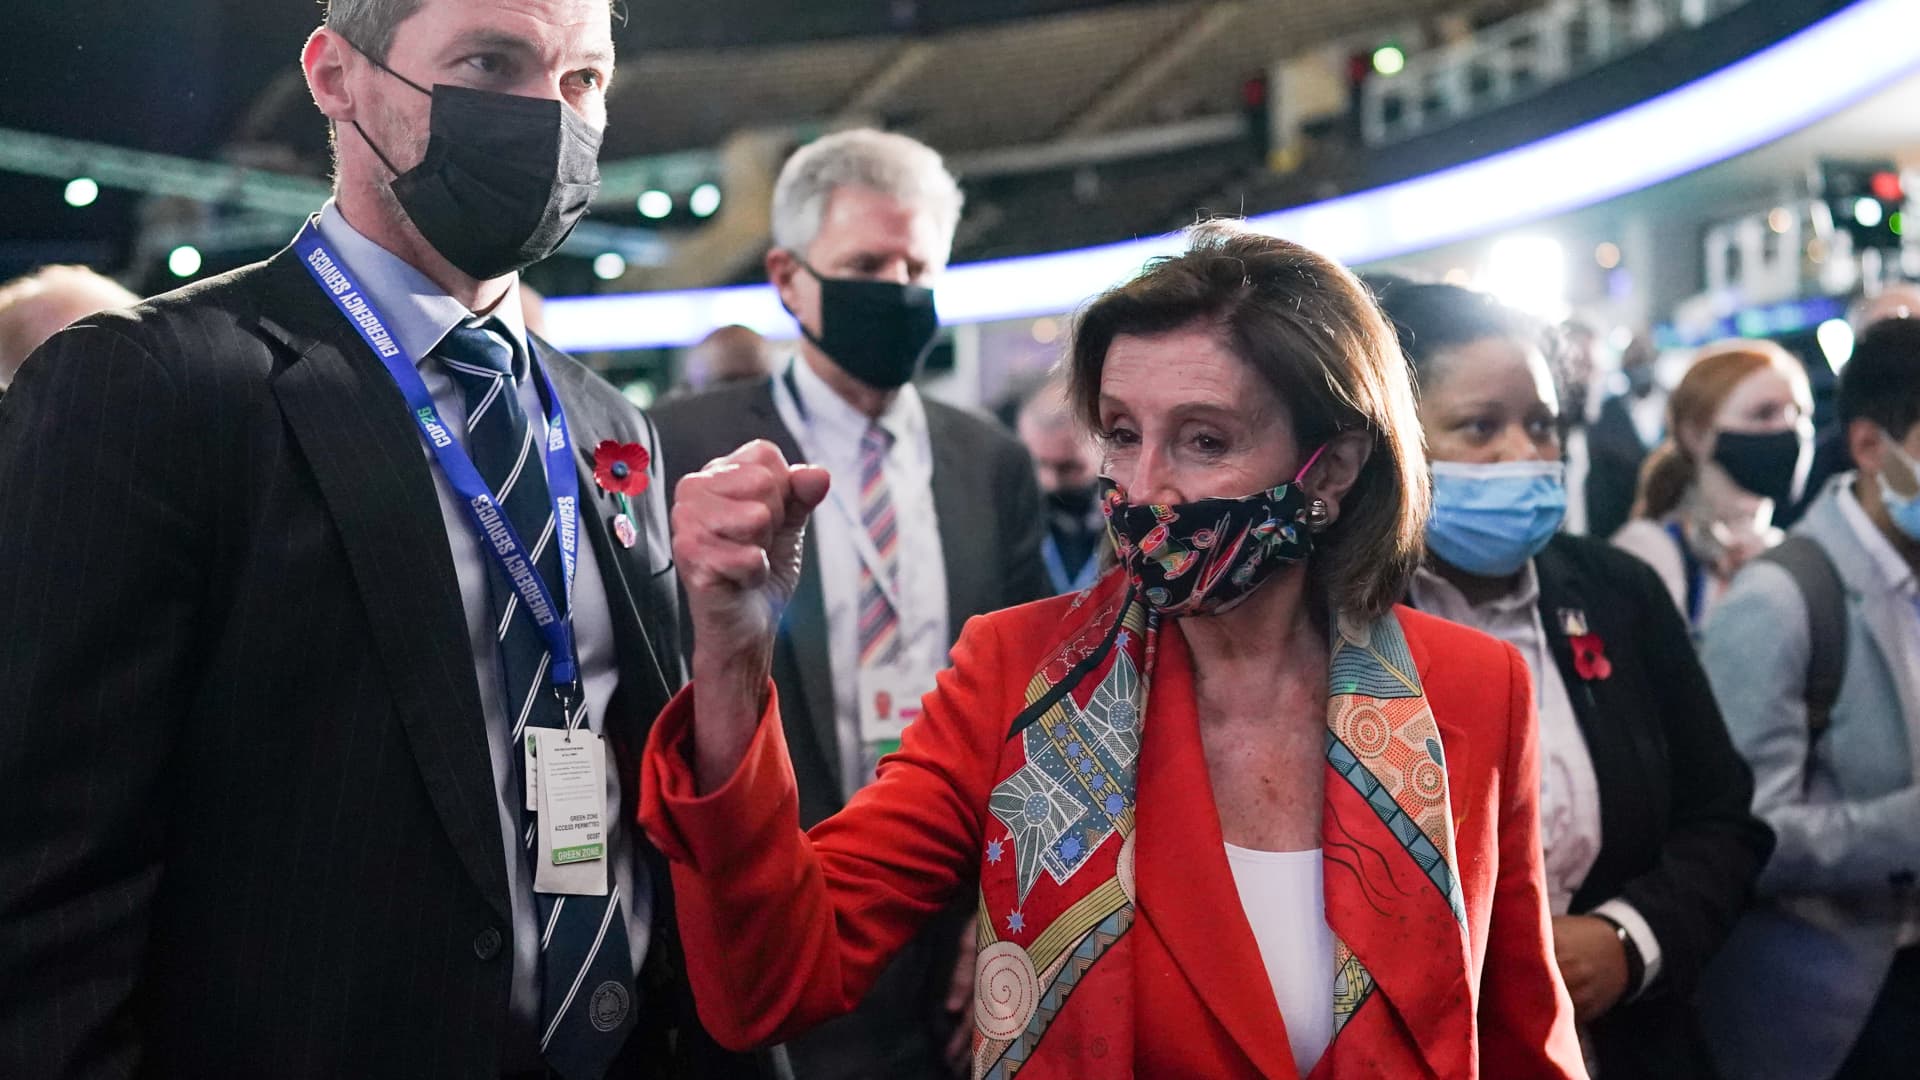 Nancy Pelosi, Speaker of the United States House of Representatives, at COP26.